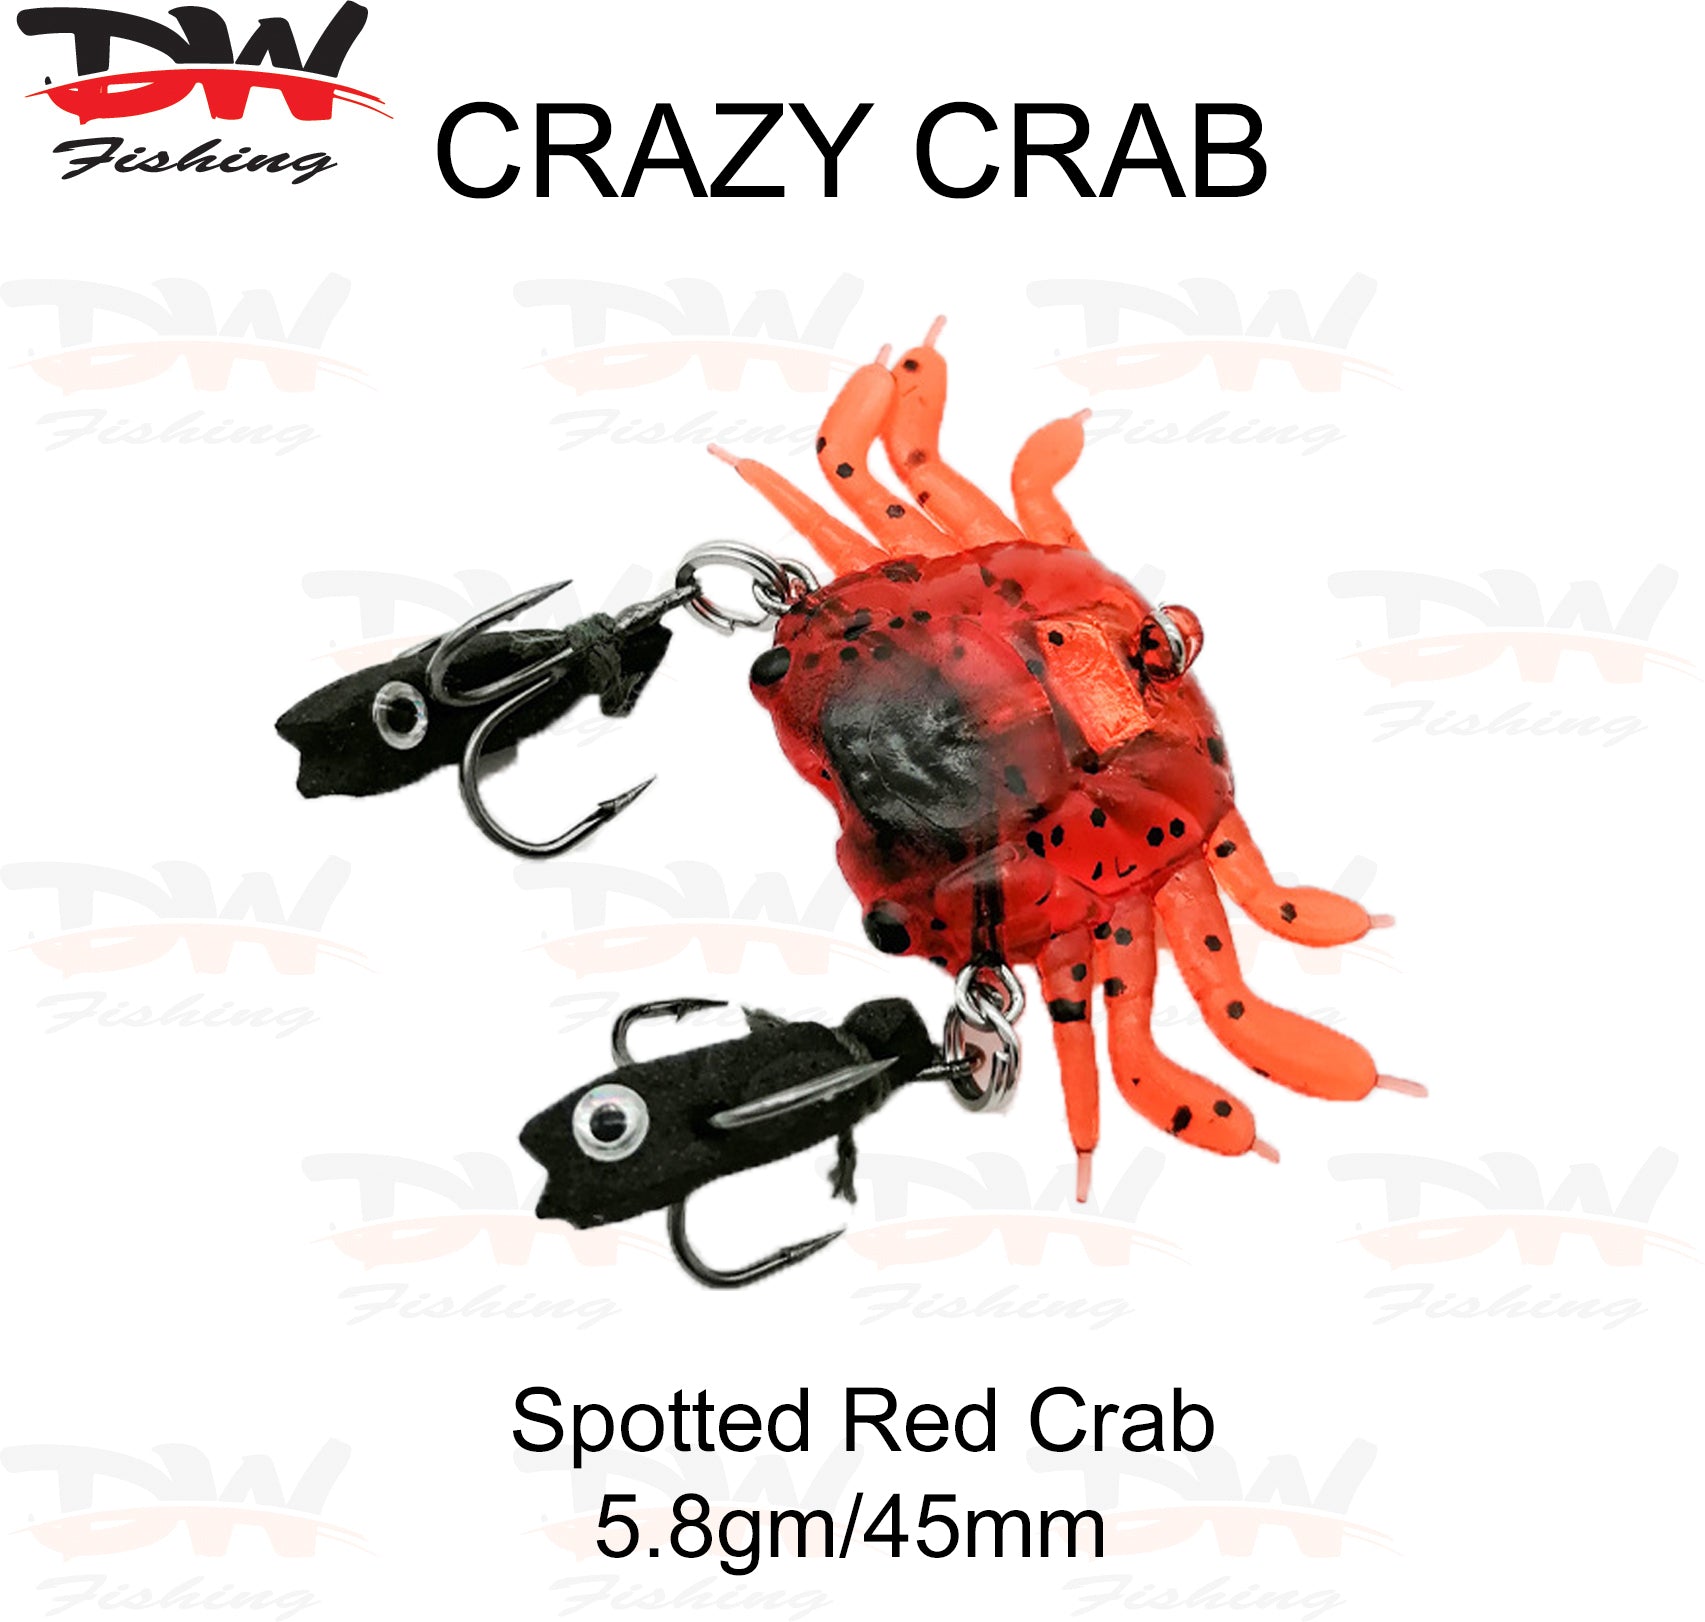 Soft Plastic Crazy Crab 45mm Lure Imitation spotted red crab